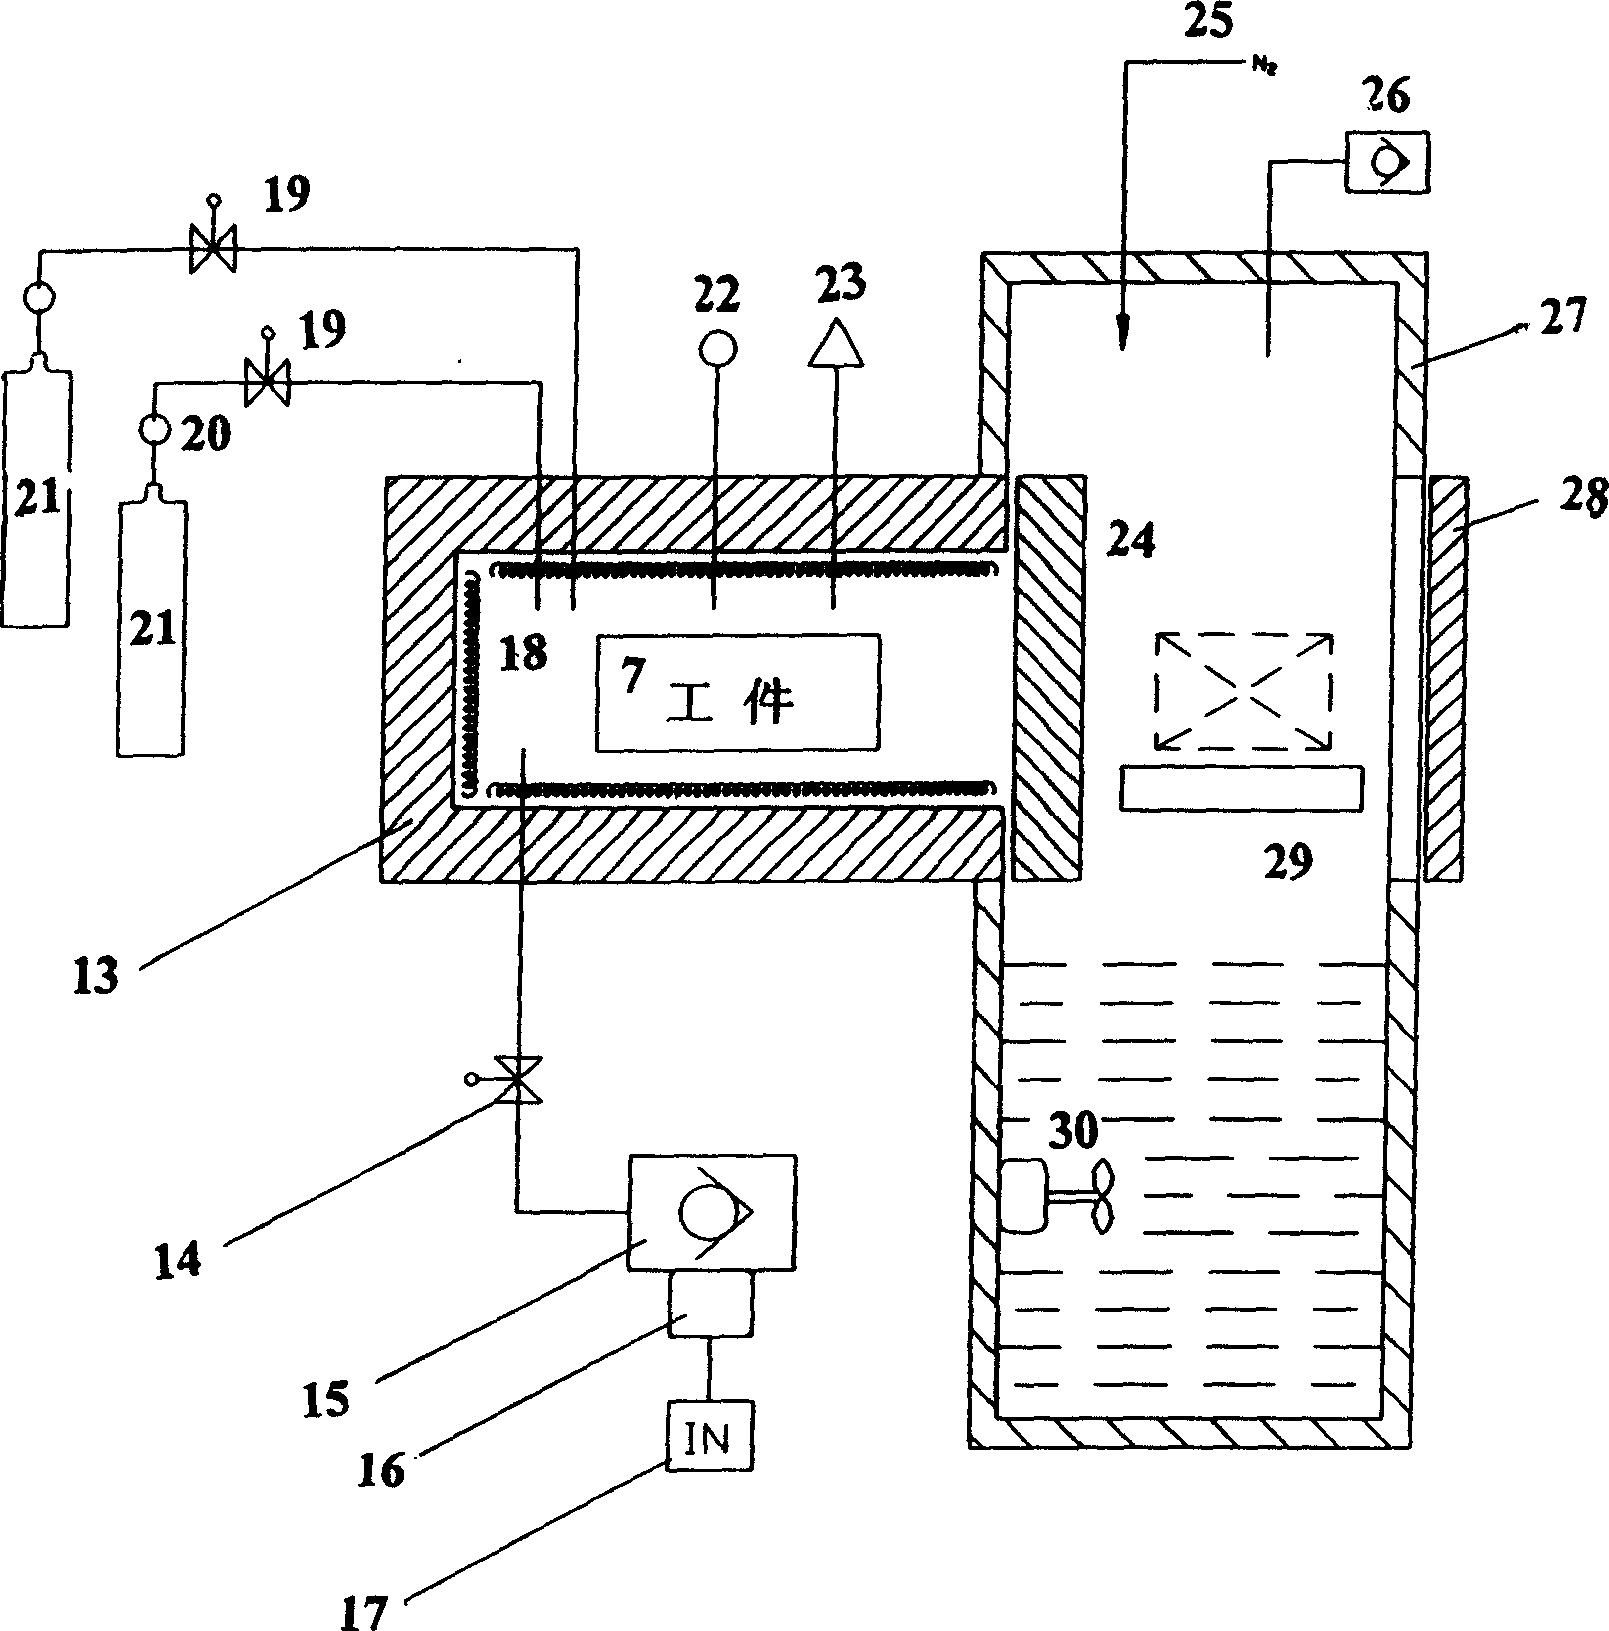 Dynamic control system for low-pressure carburating heat treament furnace